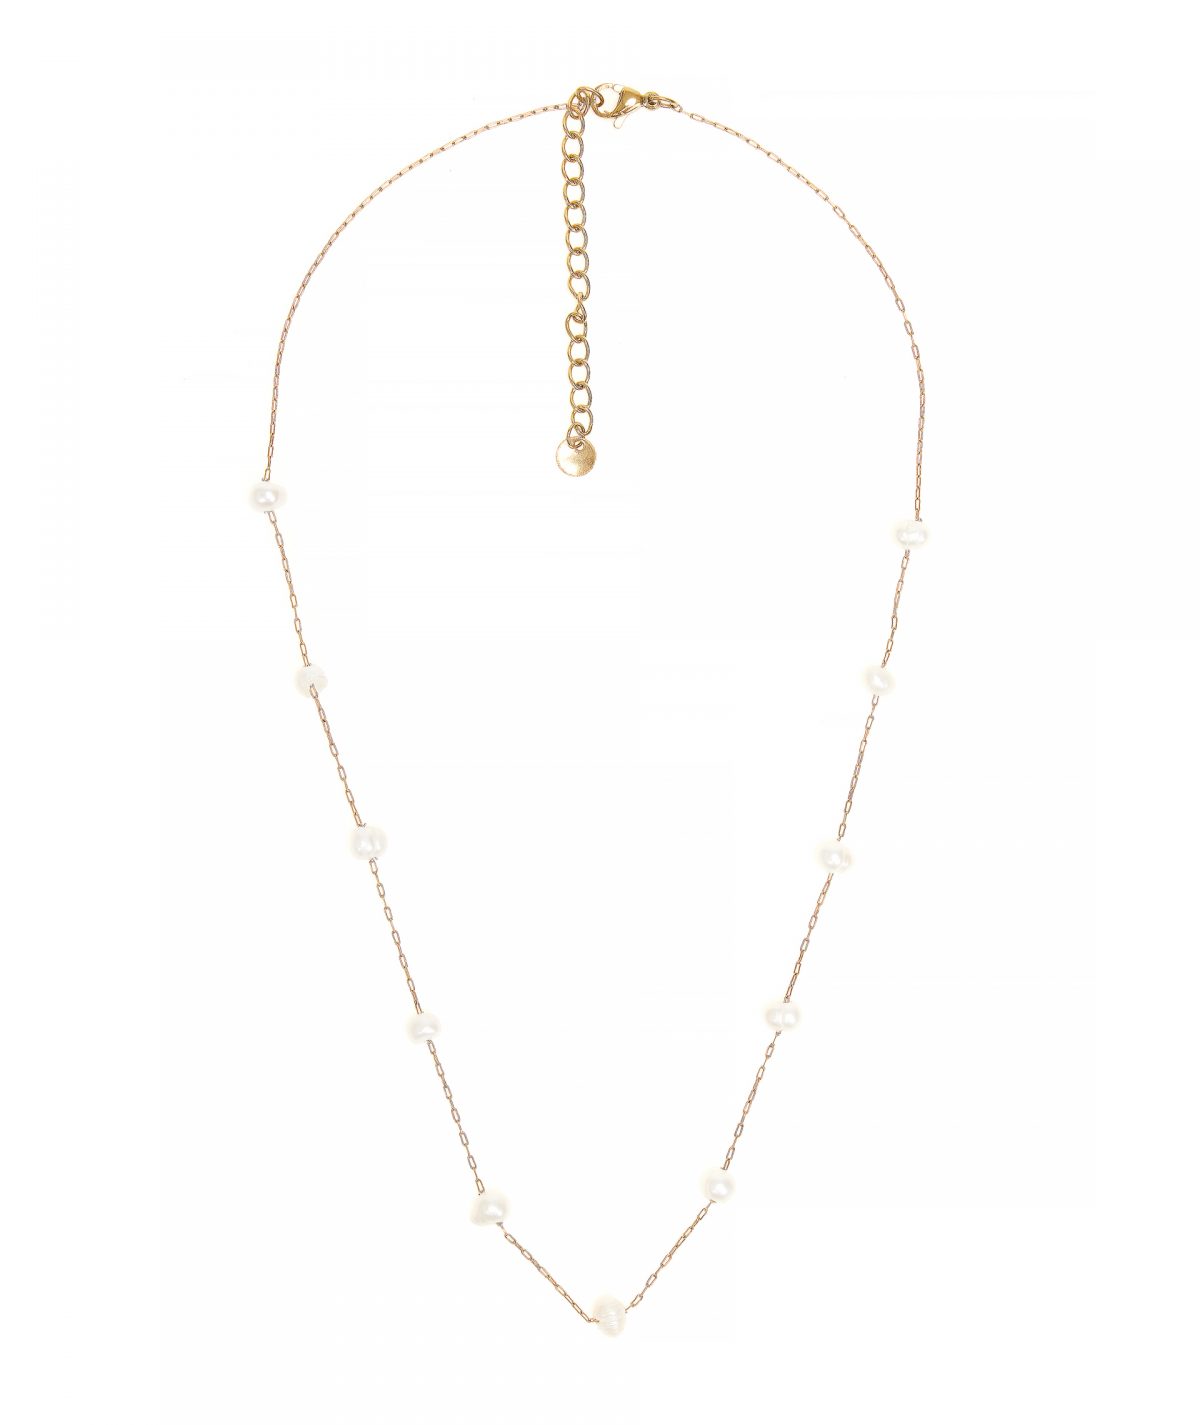 Pearls and Chain Gold Necklace by TFD